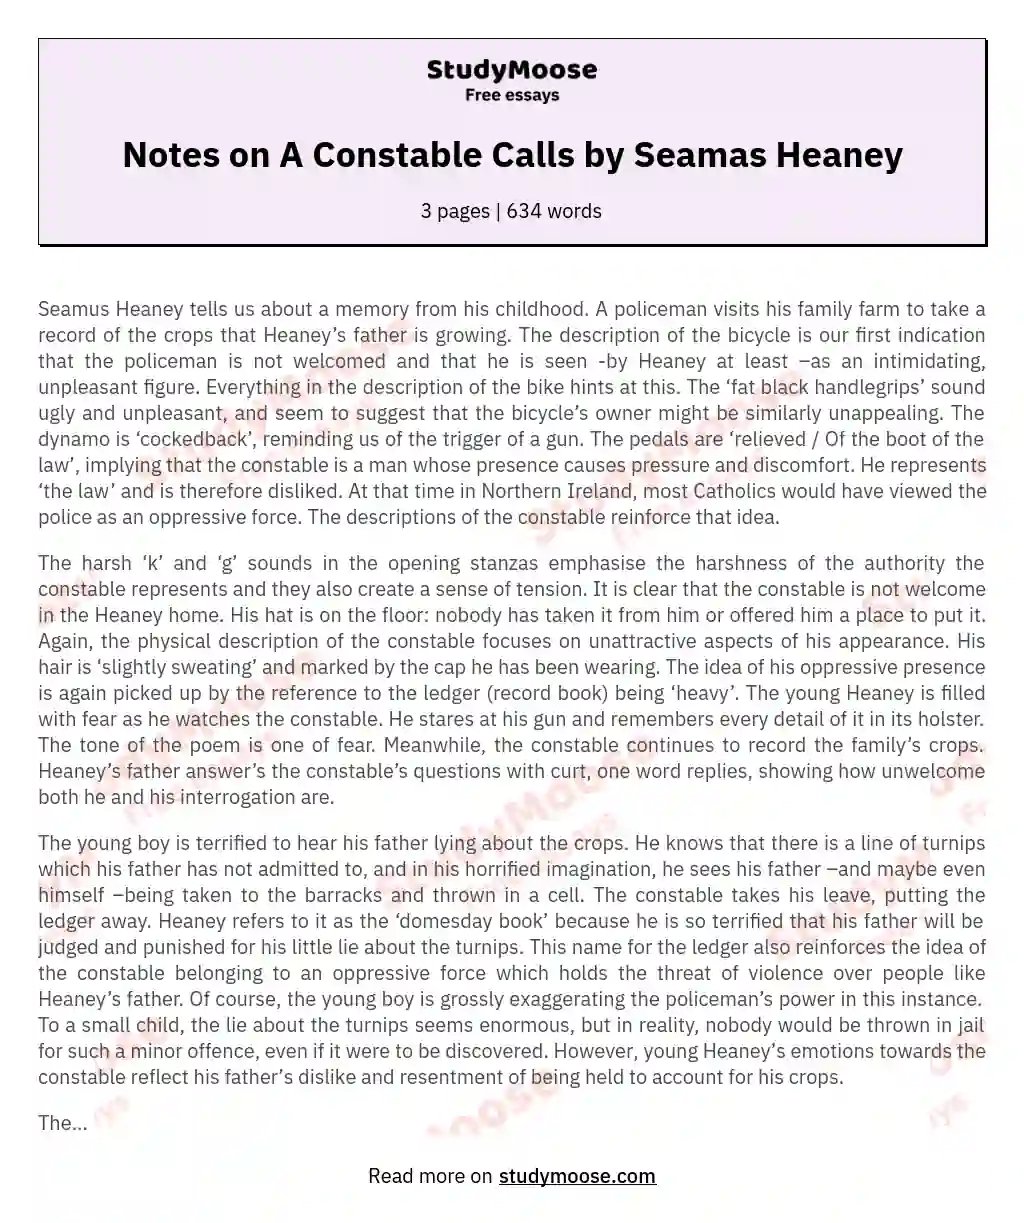 Notes on A Constable Calls by Seamas Heaney essay